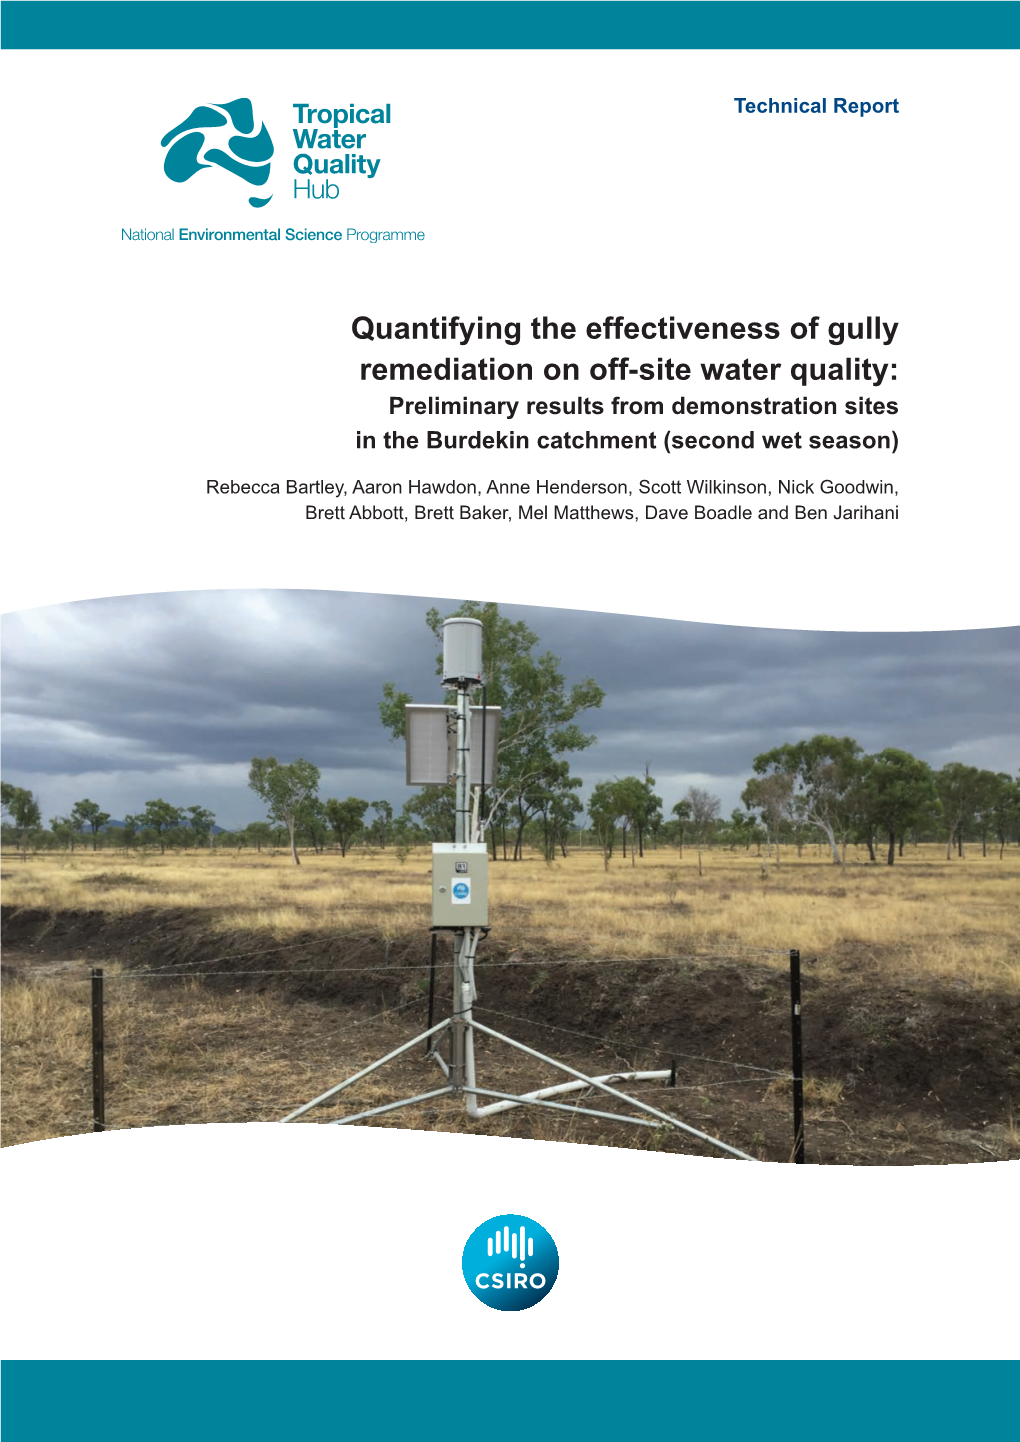 Quantifying the Effectiveness of Gully Remediation on Off-Site Water Quality